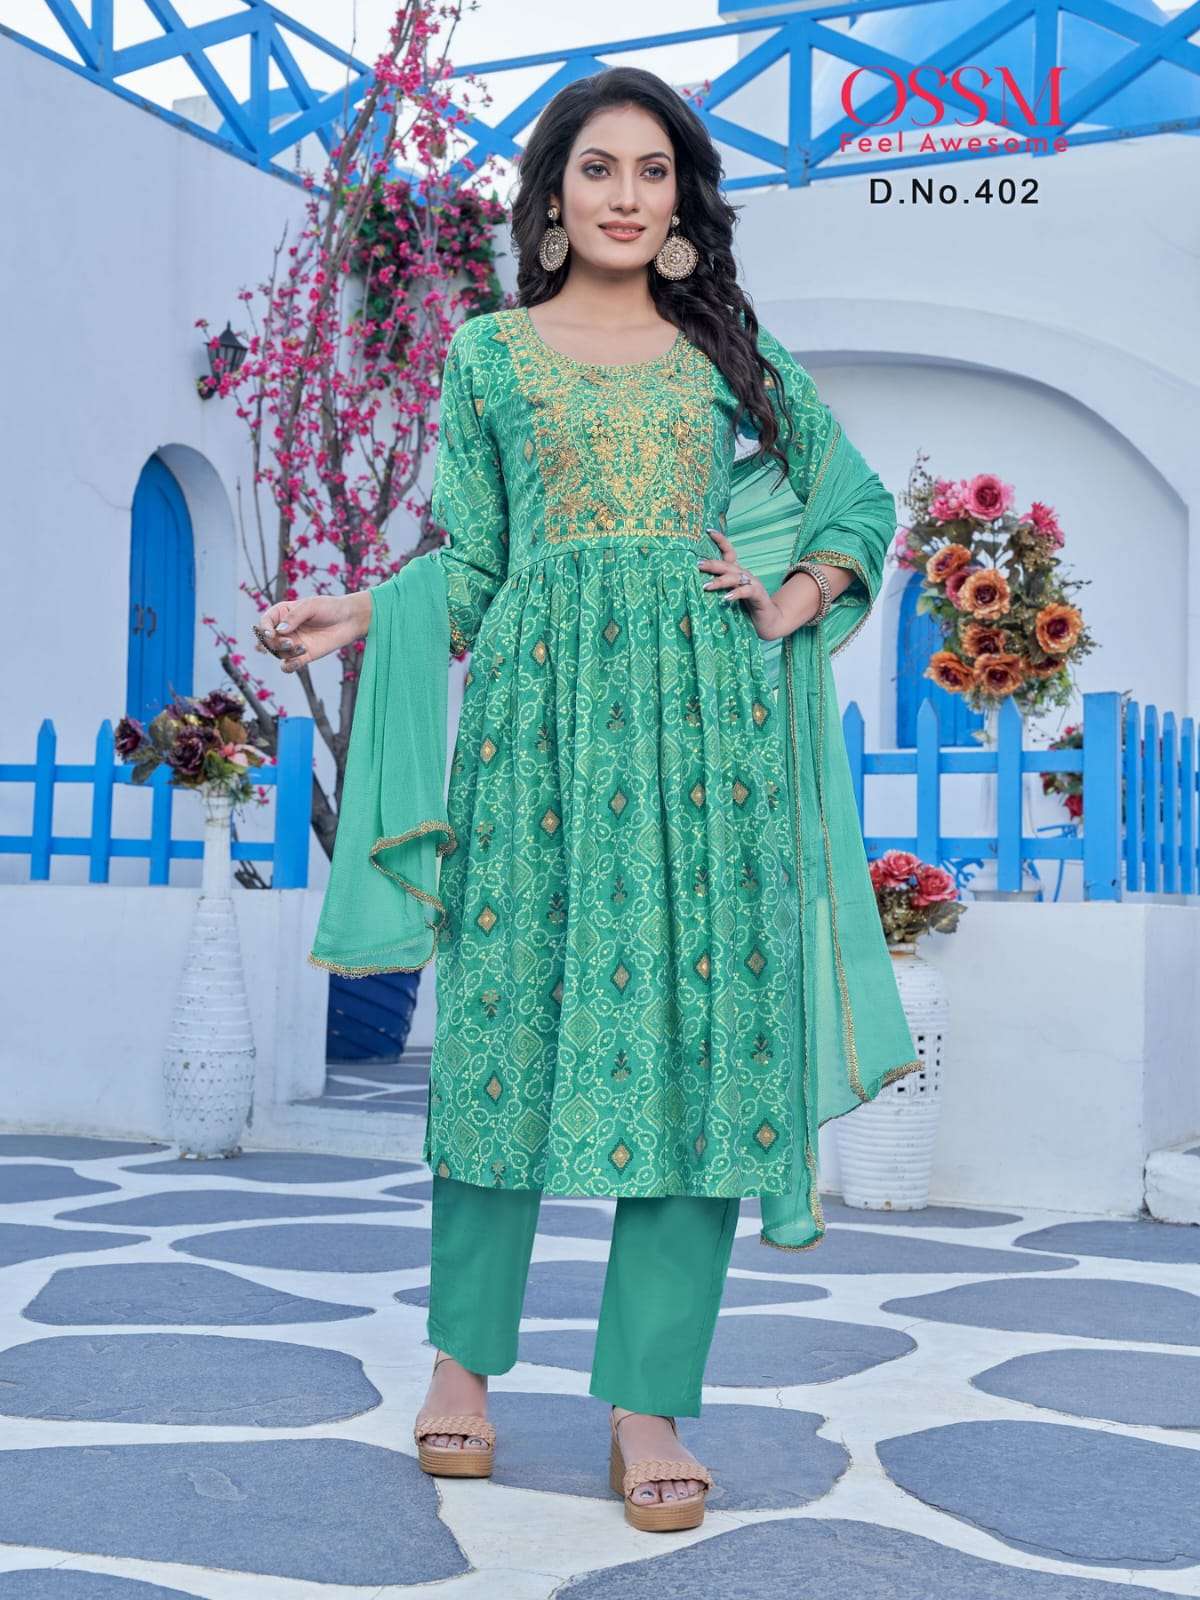 Mannat Vol-4 By Ossm 401 To 406 Series Beautiful Suits Colorful Stylish Fancy Casual Wear & Ethnic Wear Modal Chanderi Print Dresses At Wholesale Price